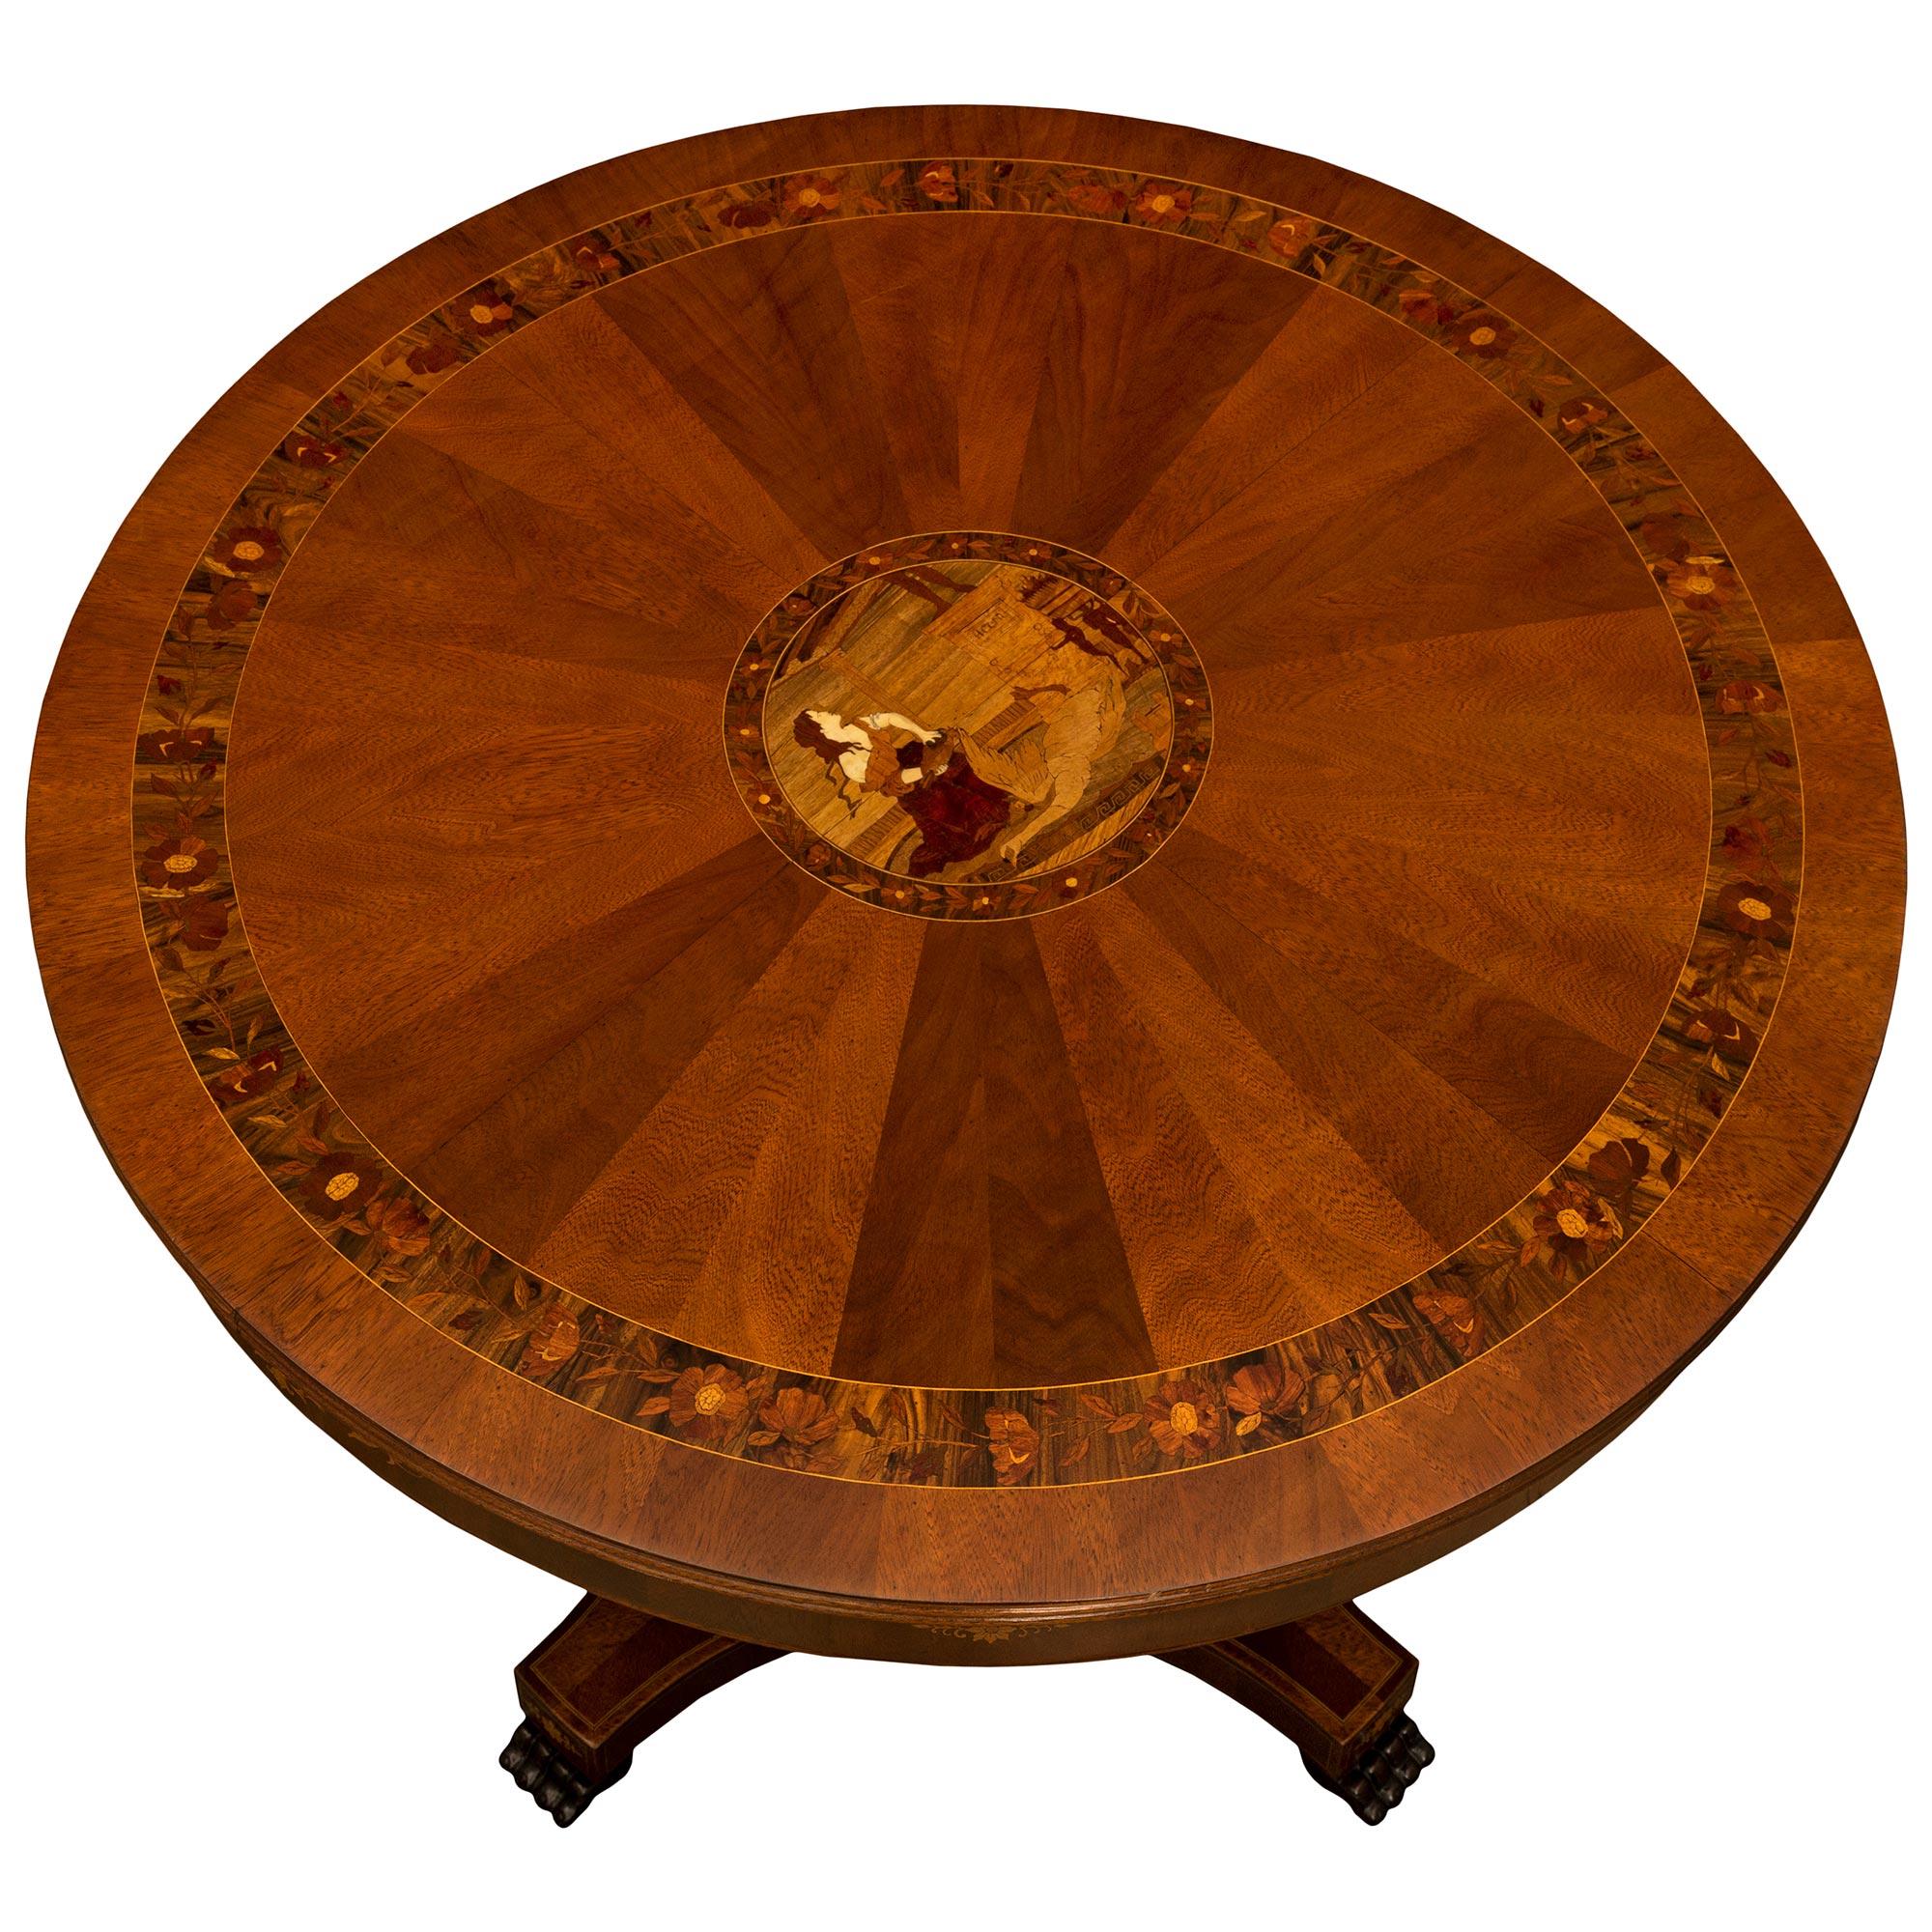 An attractive Italian 19th century Louis XVI st. Walnut, Mahogany and exotic wood center table. The table is raised a square pedestal with concave sides displaying inlaid palmettes all above the pawed supports. Above is the central reeded tapered